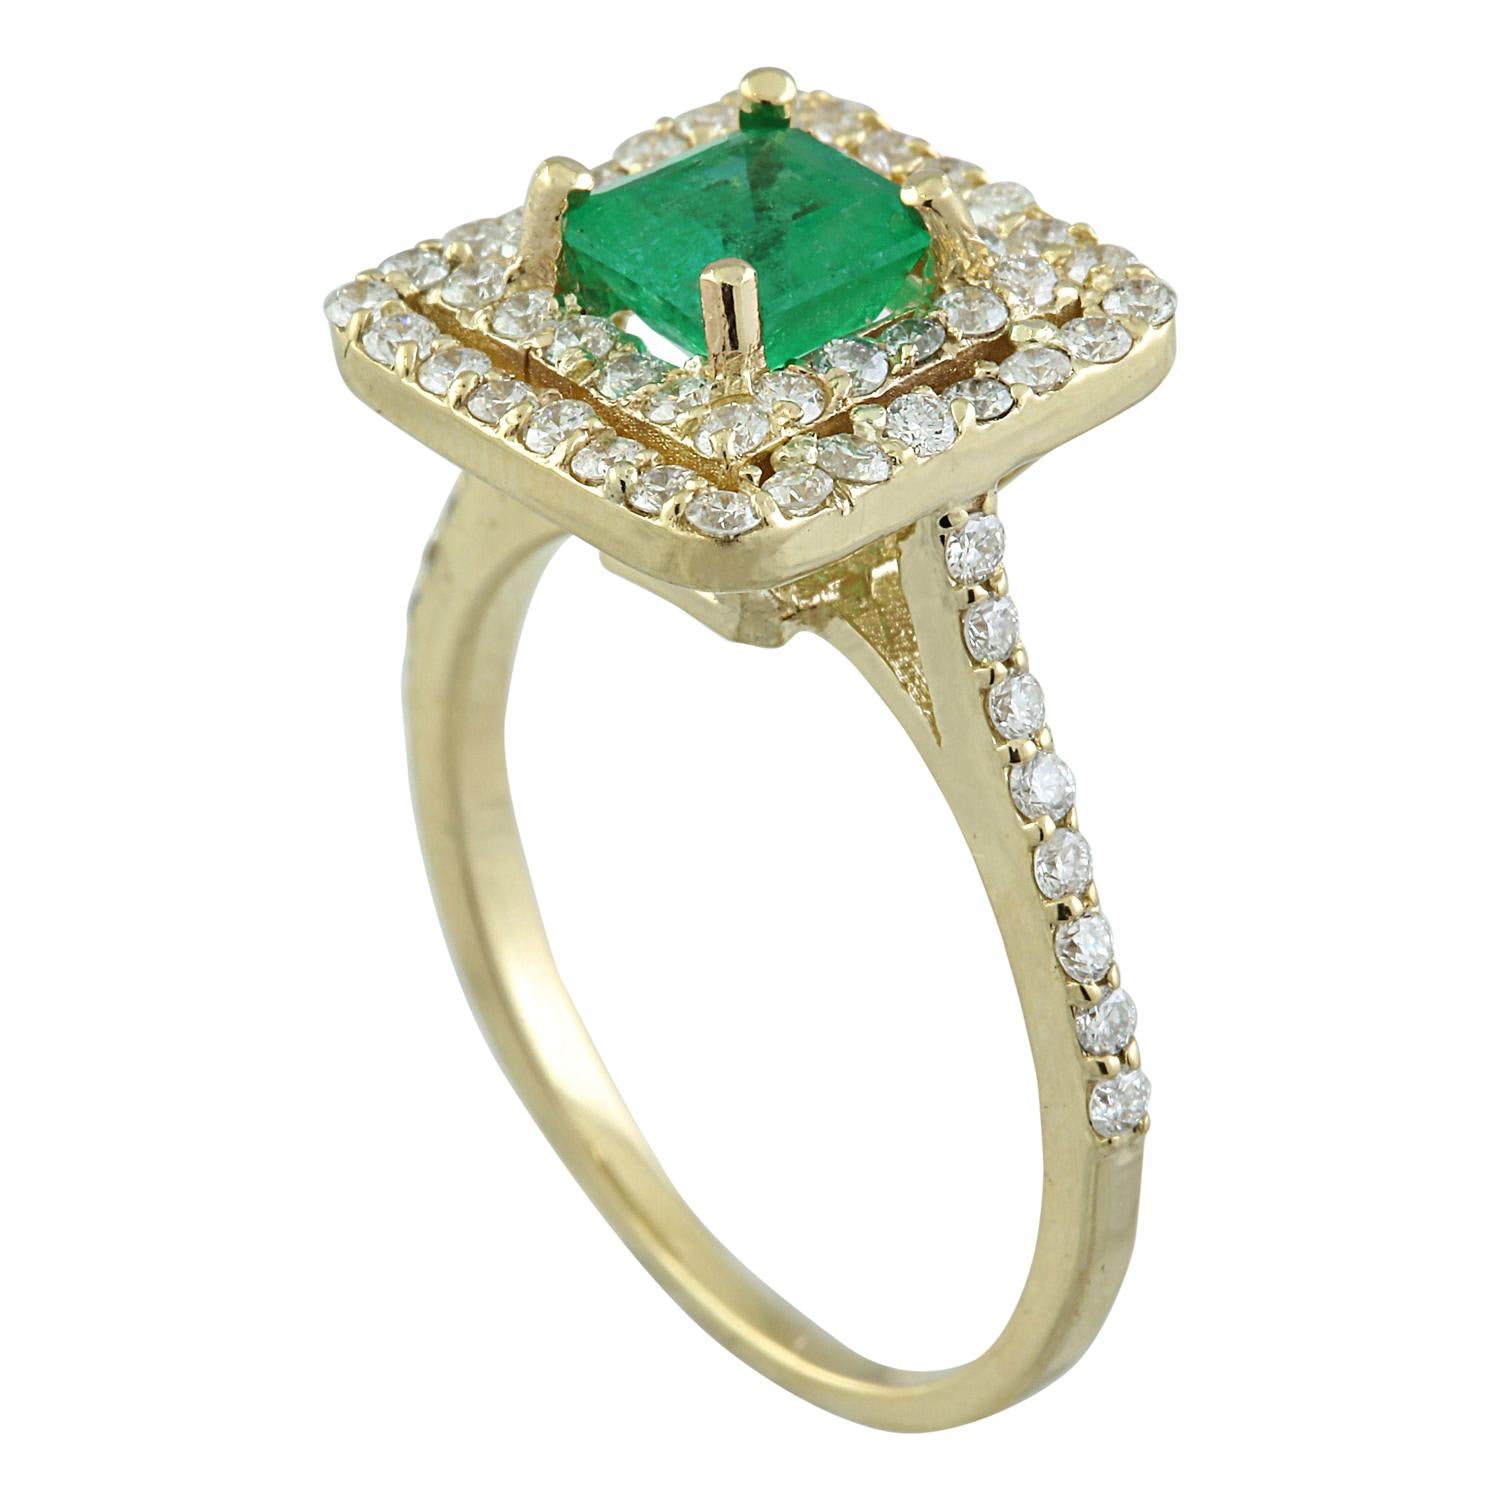 Emerald Cut Natural Emerald 14 Karat Solid Yellow Gold Diamond Ring For Sale